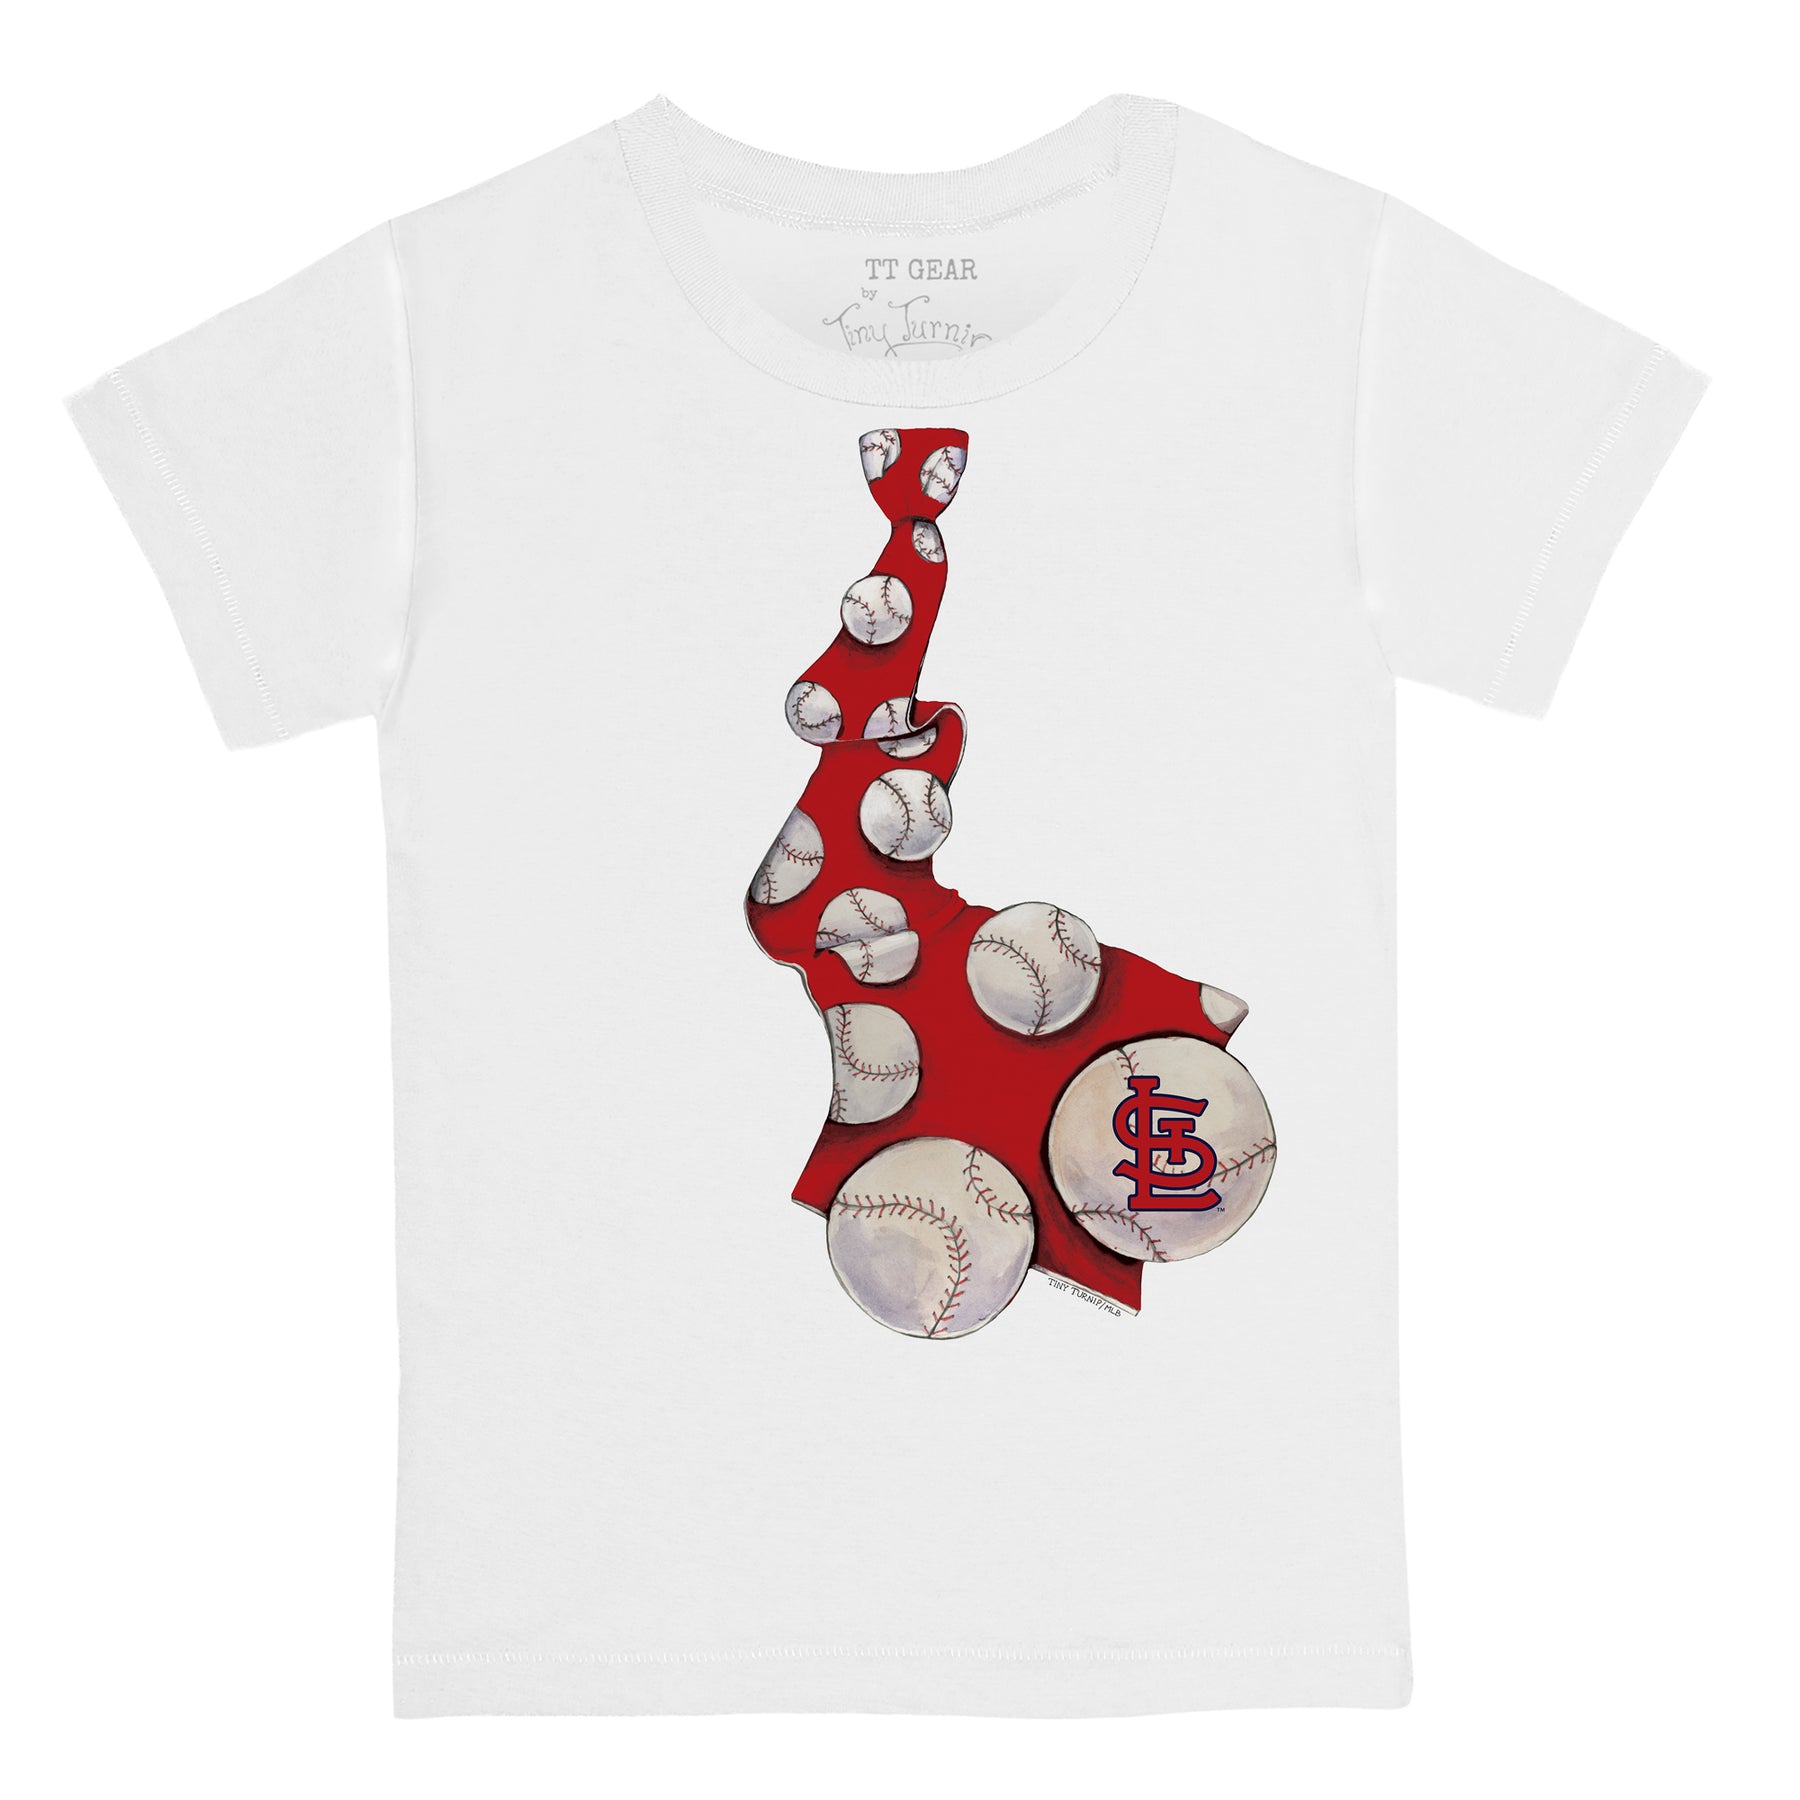 Toddler Tiny Turnip White St. Louis Cardinals Spit Ball T-Shirt Size: 2T